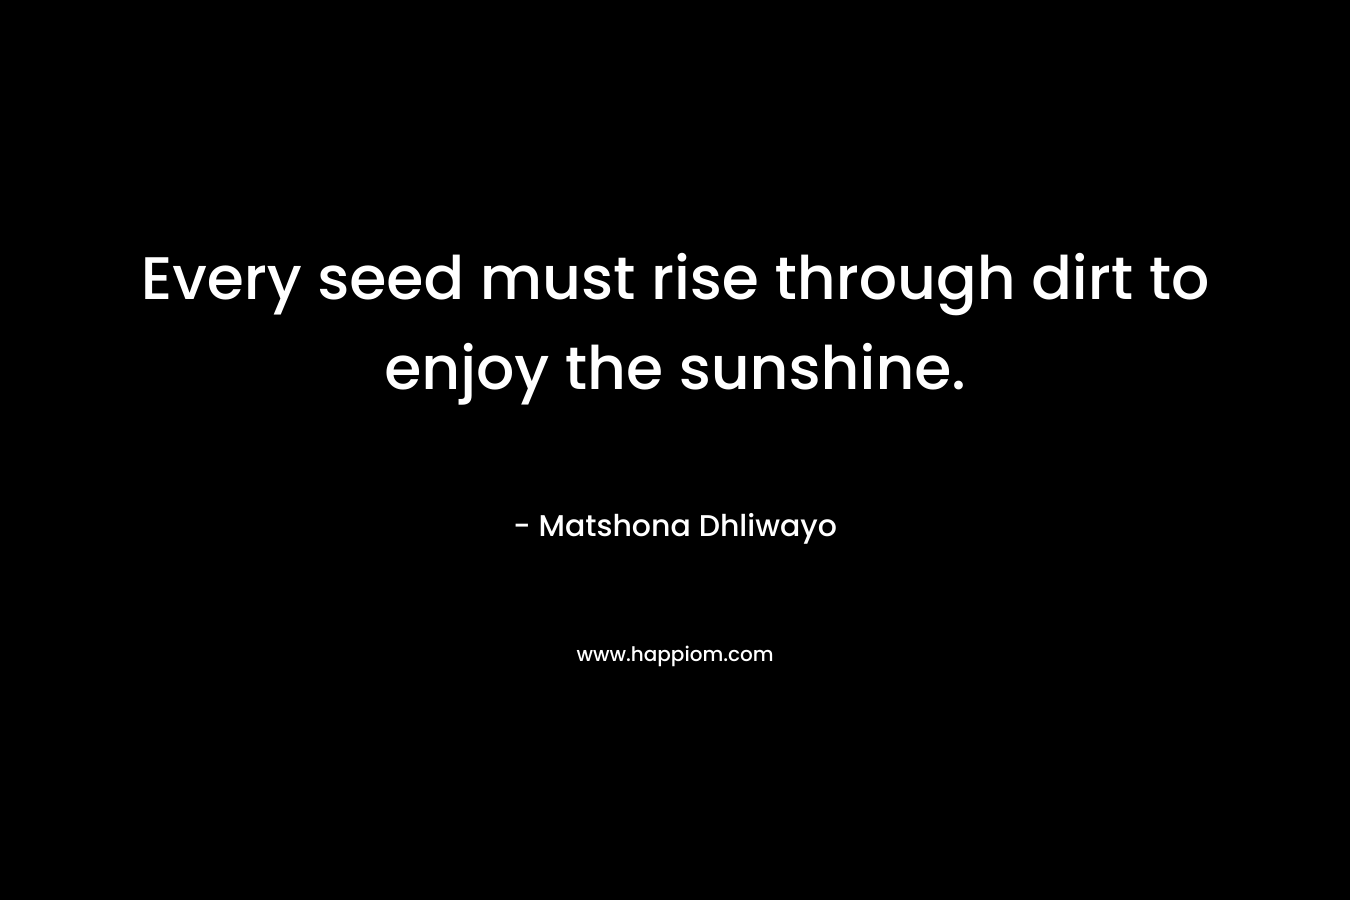 Every seed must rise through dirt to enjoy the sunshine.